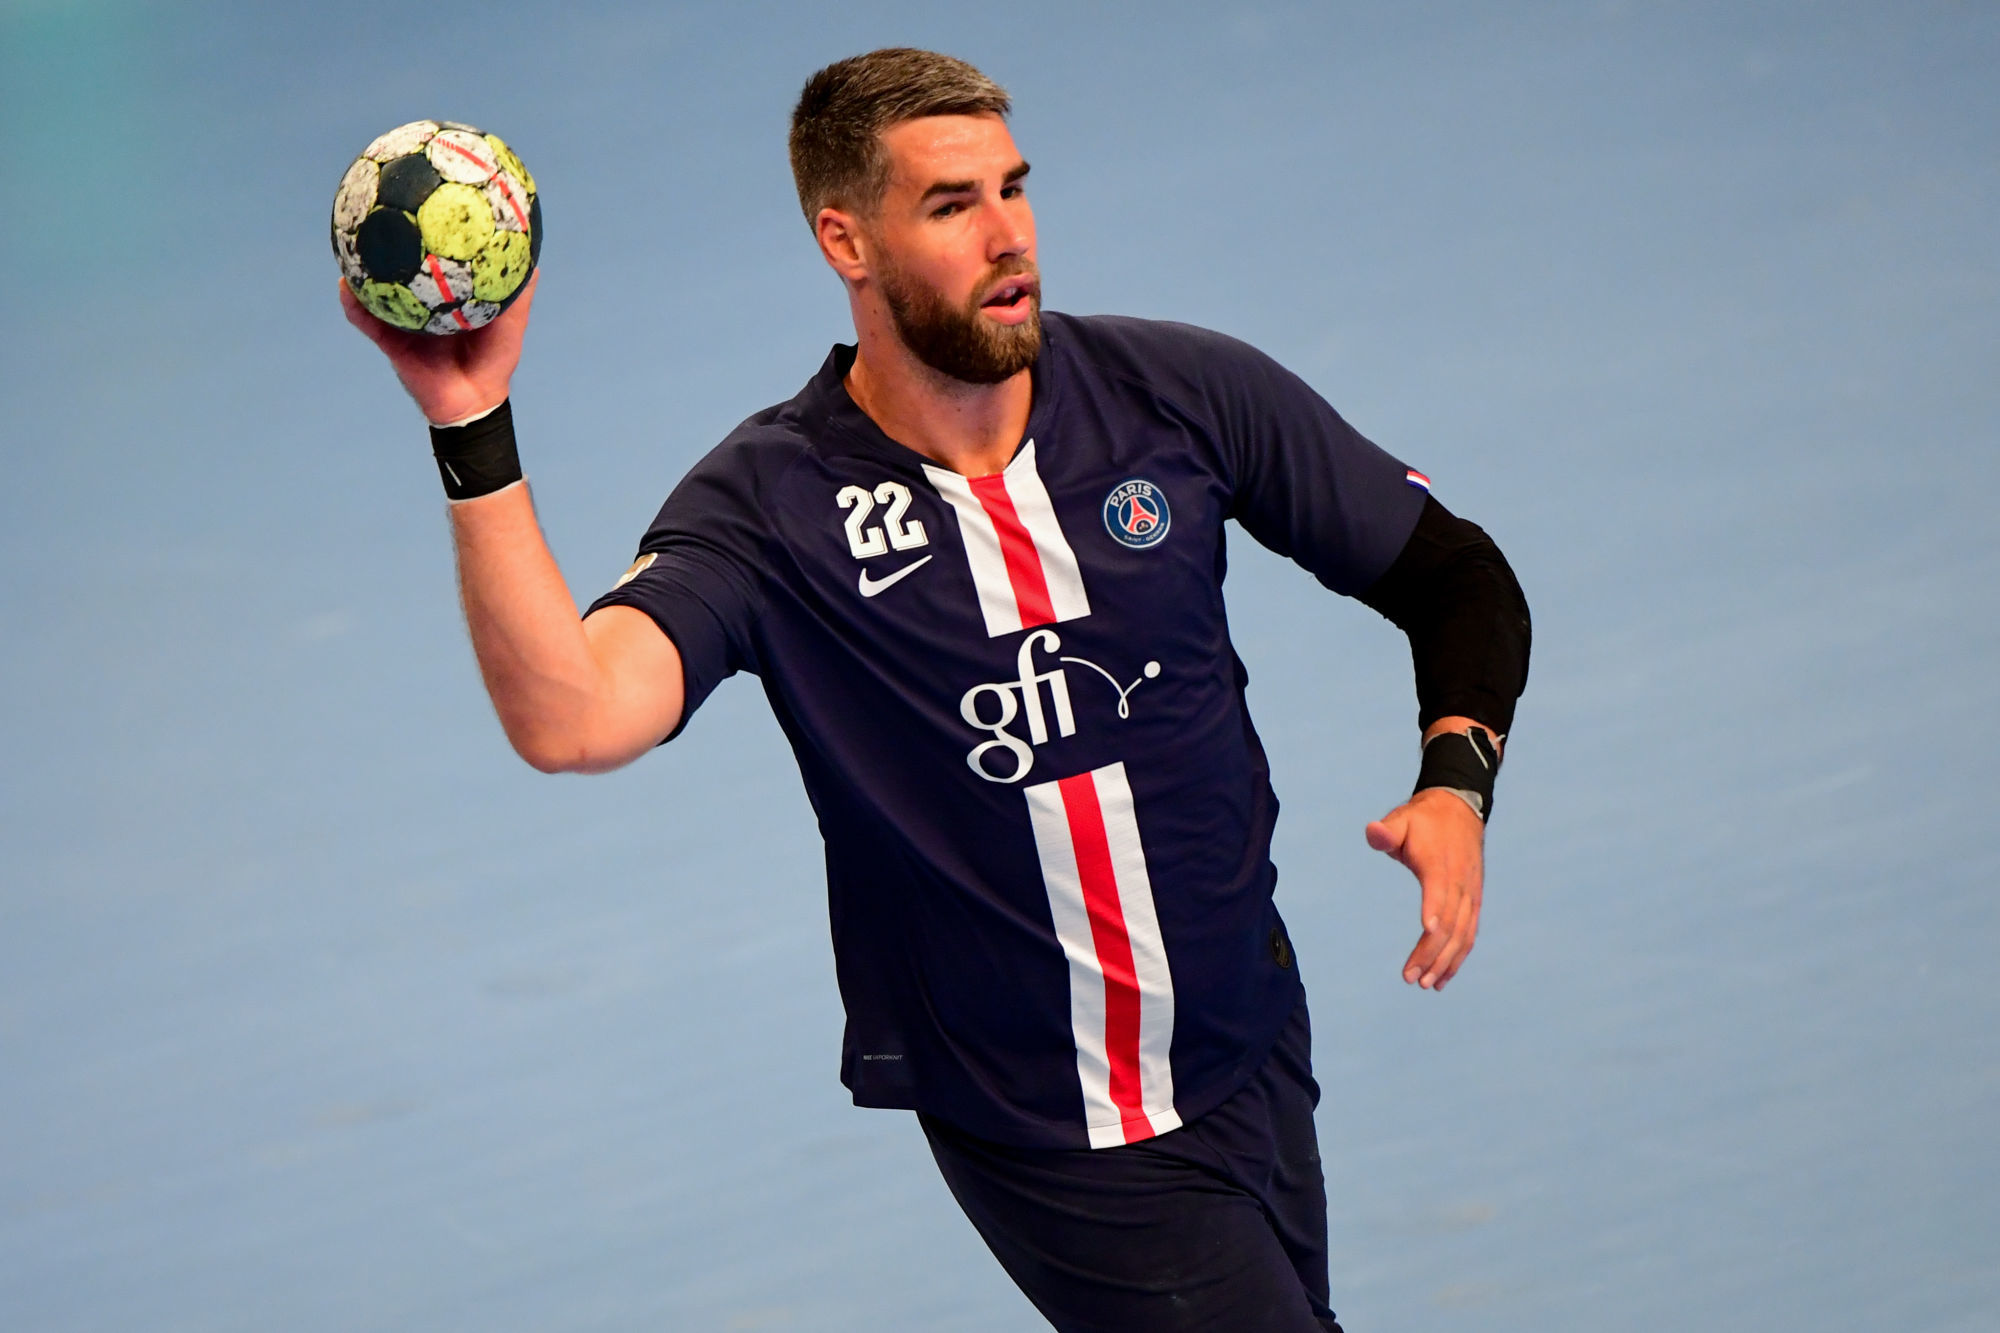 Luka KARABATIC of PSG during the Lidl Starligue match between Paris Saint Germain and Nantes at Stade Pierre de Coubertin on September 11, 2019 in Paris, France. (Photo by Anthony Dibon/Icon Sport) - Luka KARABATIC - Pierre de Coubertin - Paris (France)